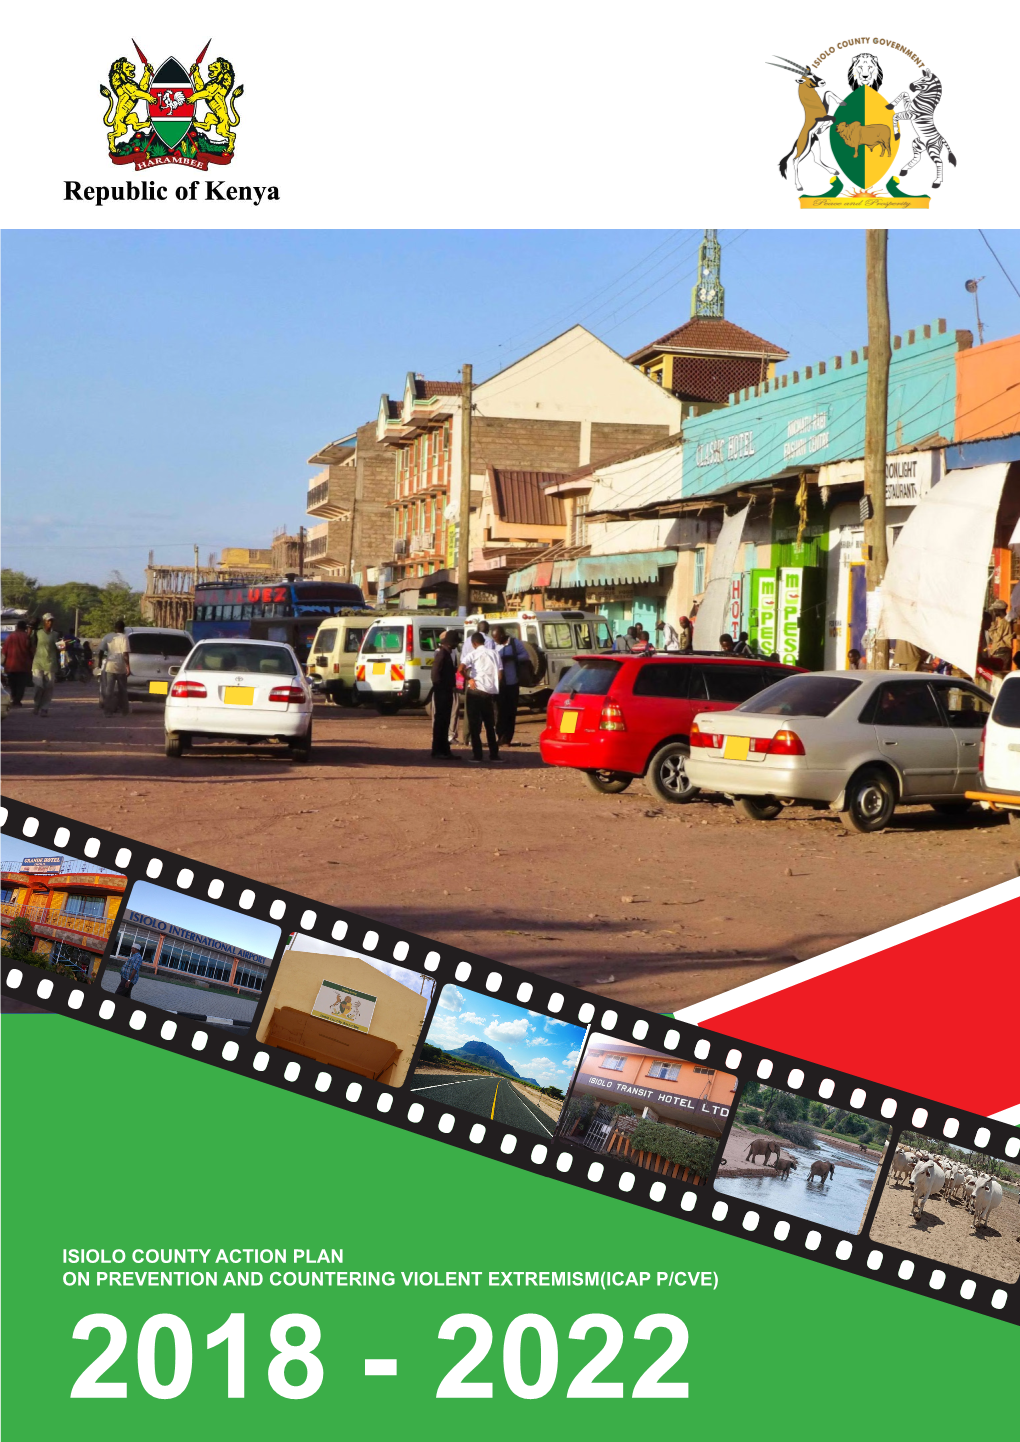 Isiolo County Action Plan to Counter Violent Extremism